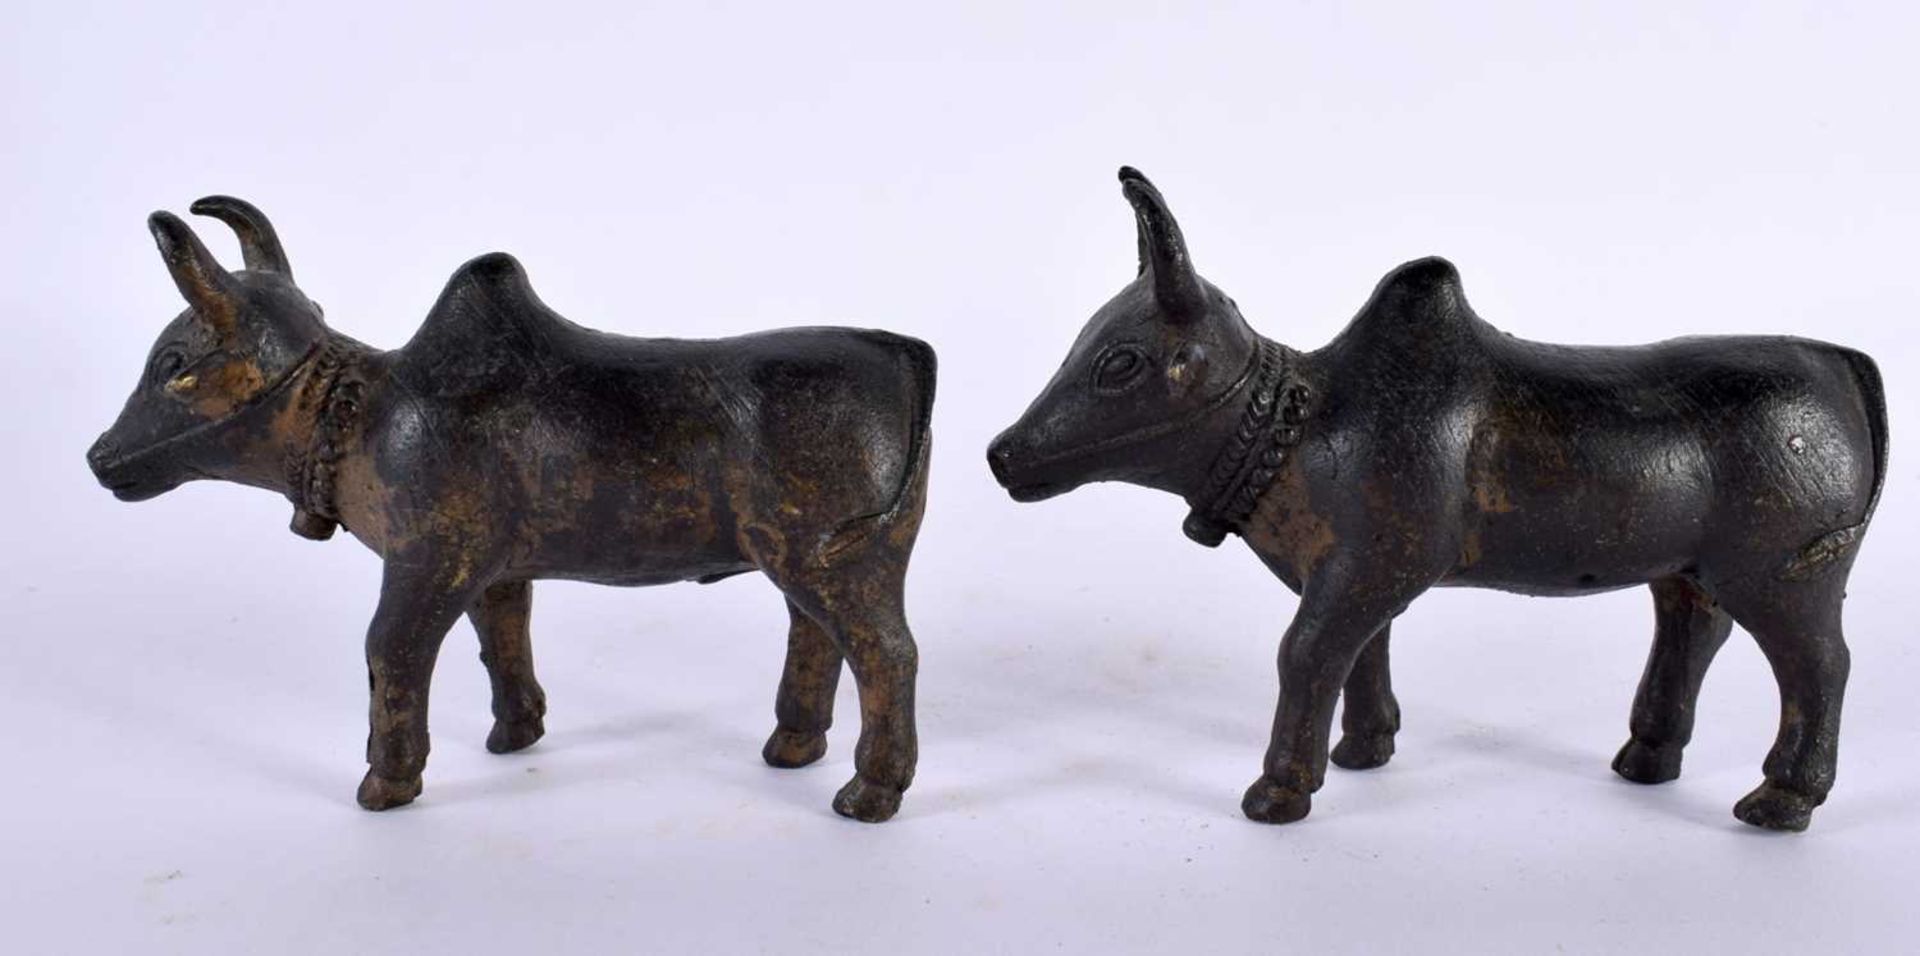 A PAIR OF 18TH/19TH CENTURY INDIAN BRONZE FIGURES OF NANDI BULLS modelled roaming. 11cm x 8 cm. - Image 3 of 5